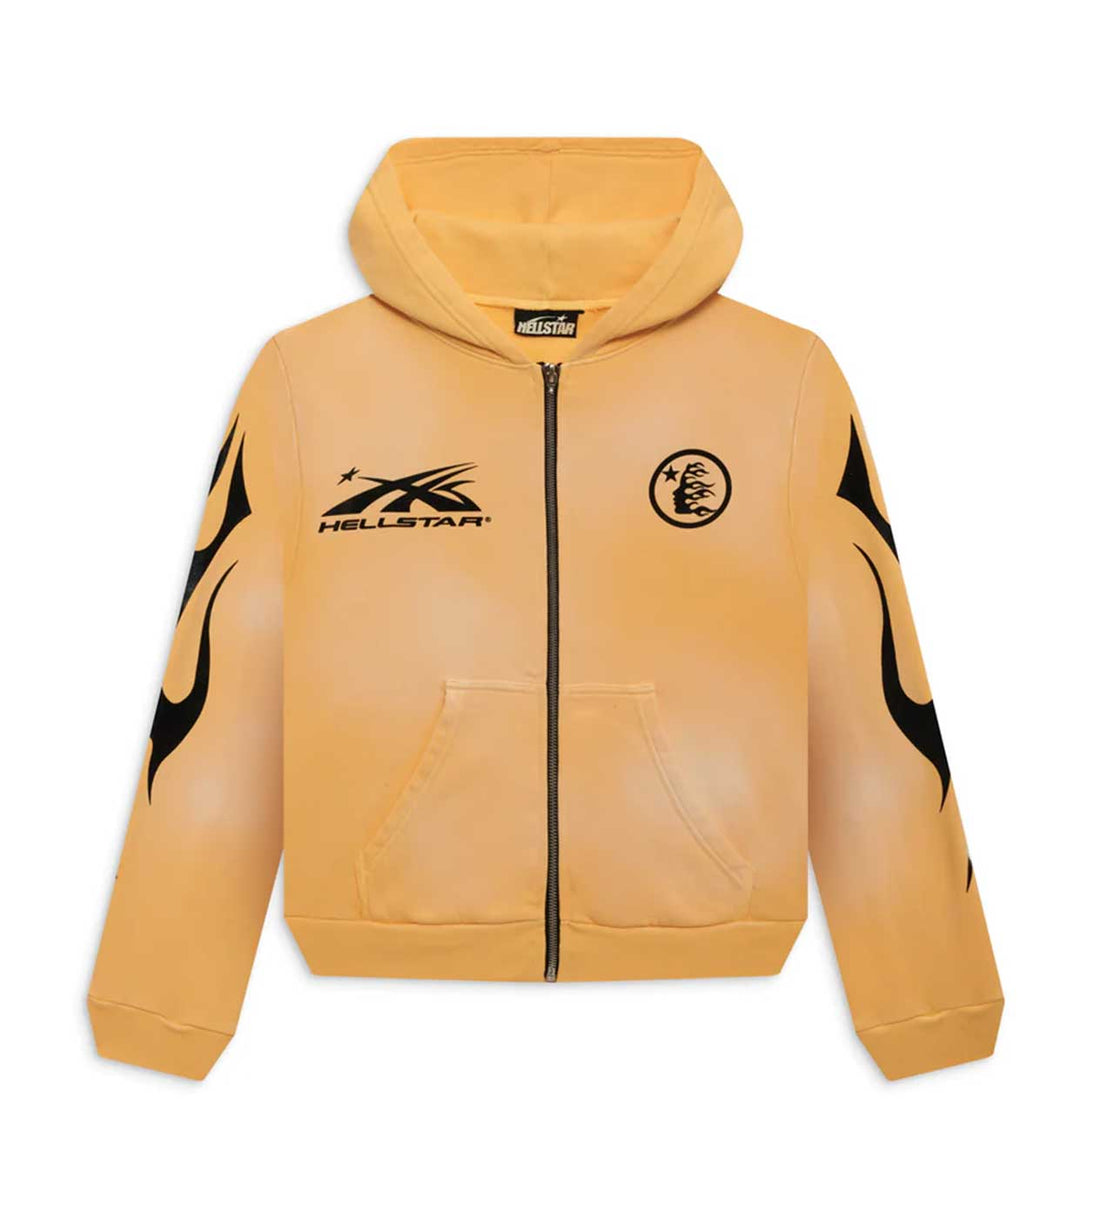 Hellstar Sports Sports Zip-Up Yellow Front View